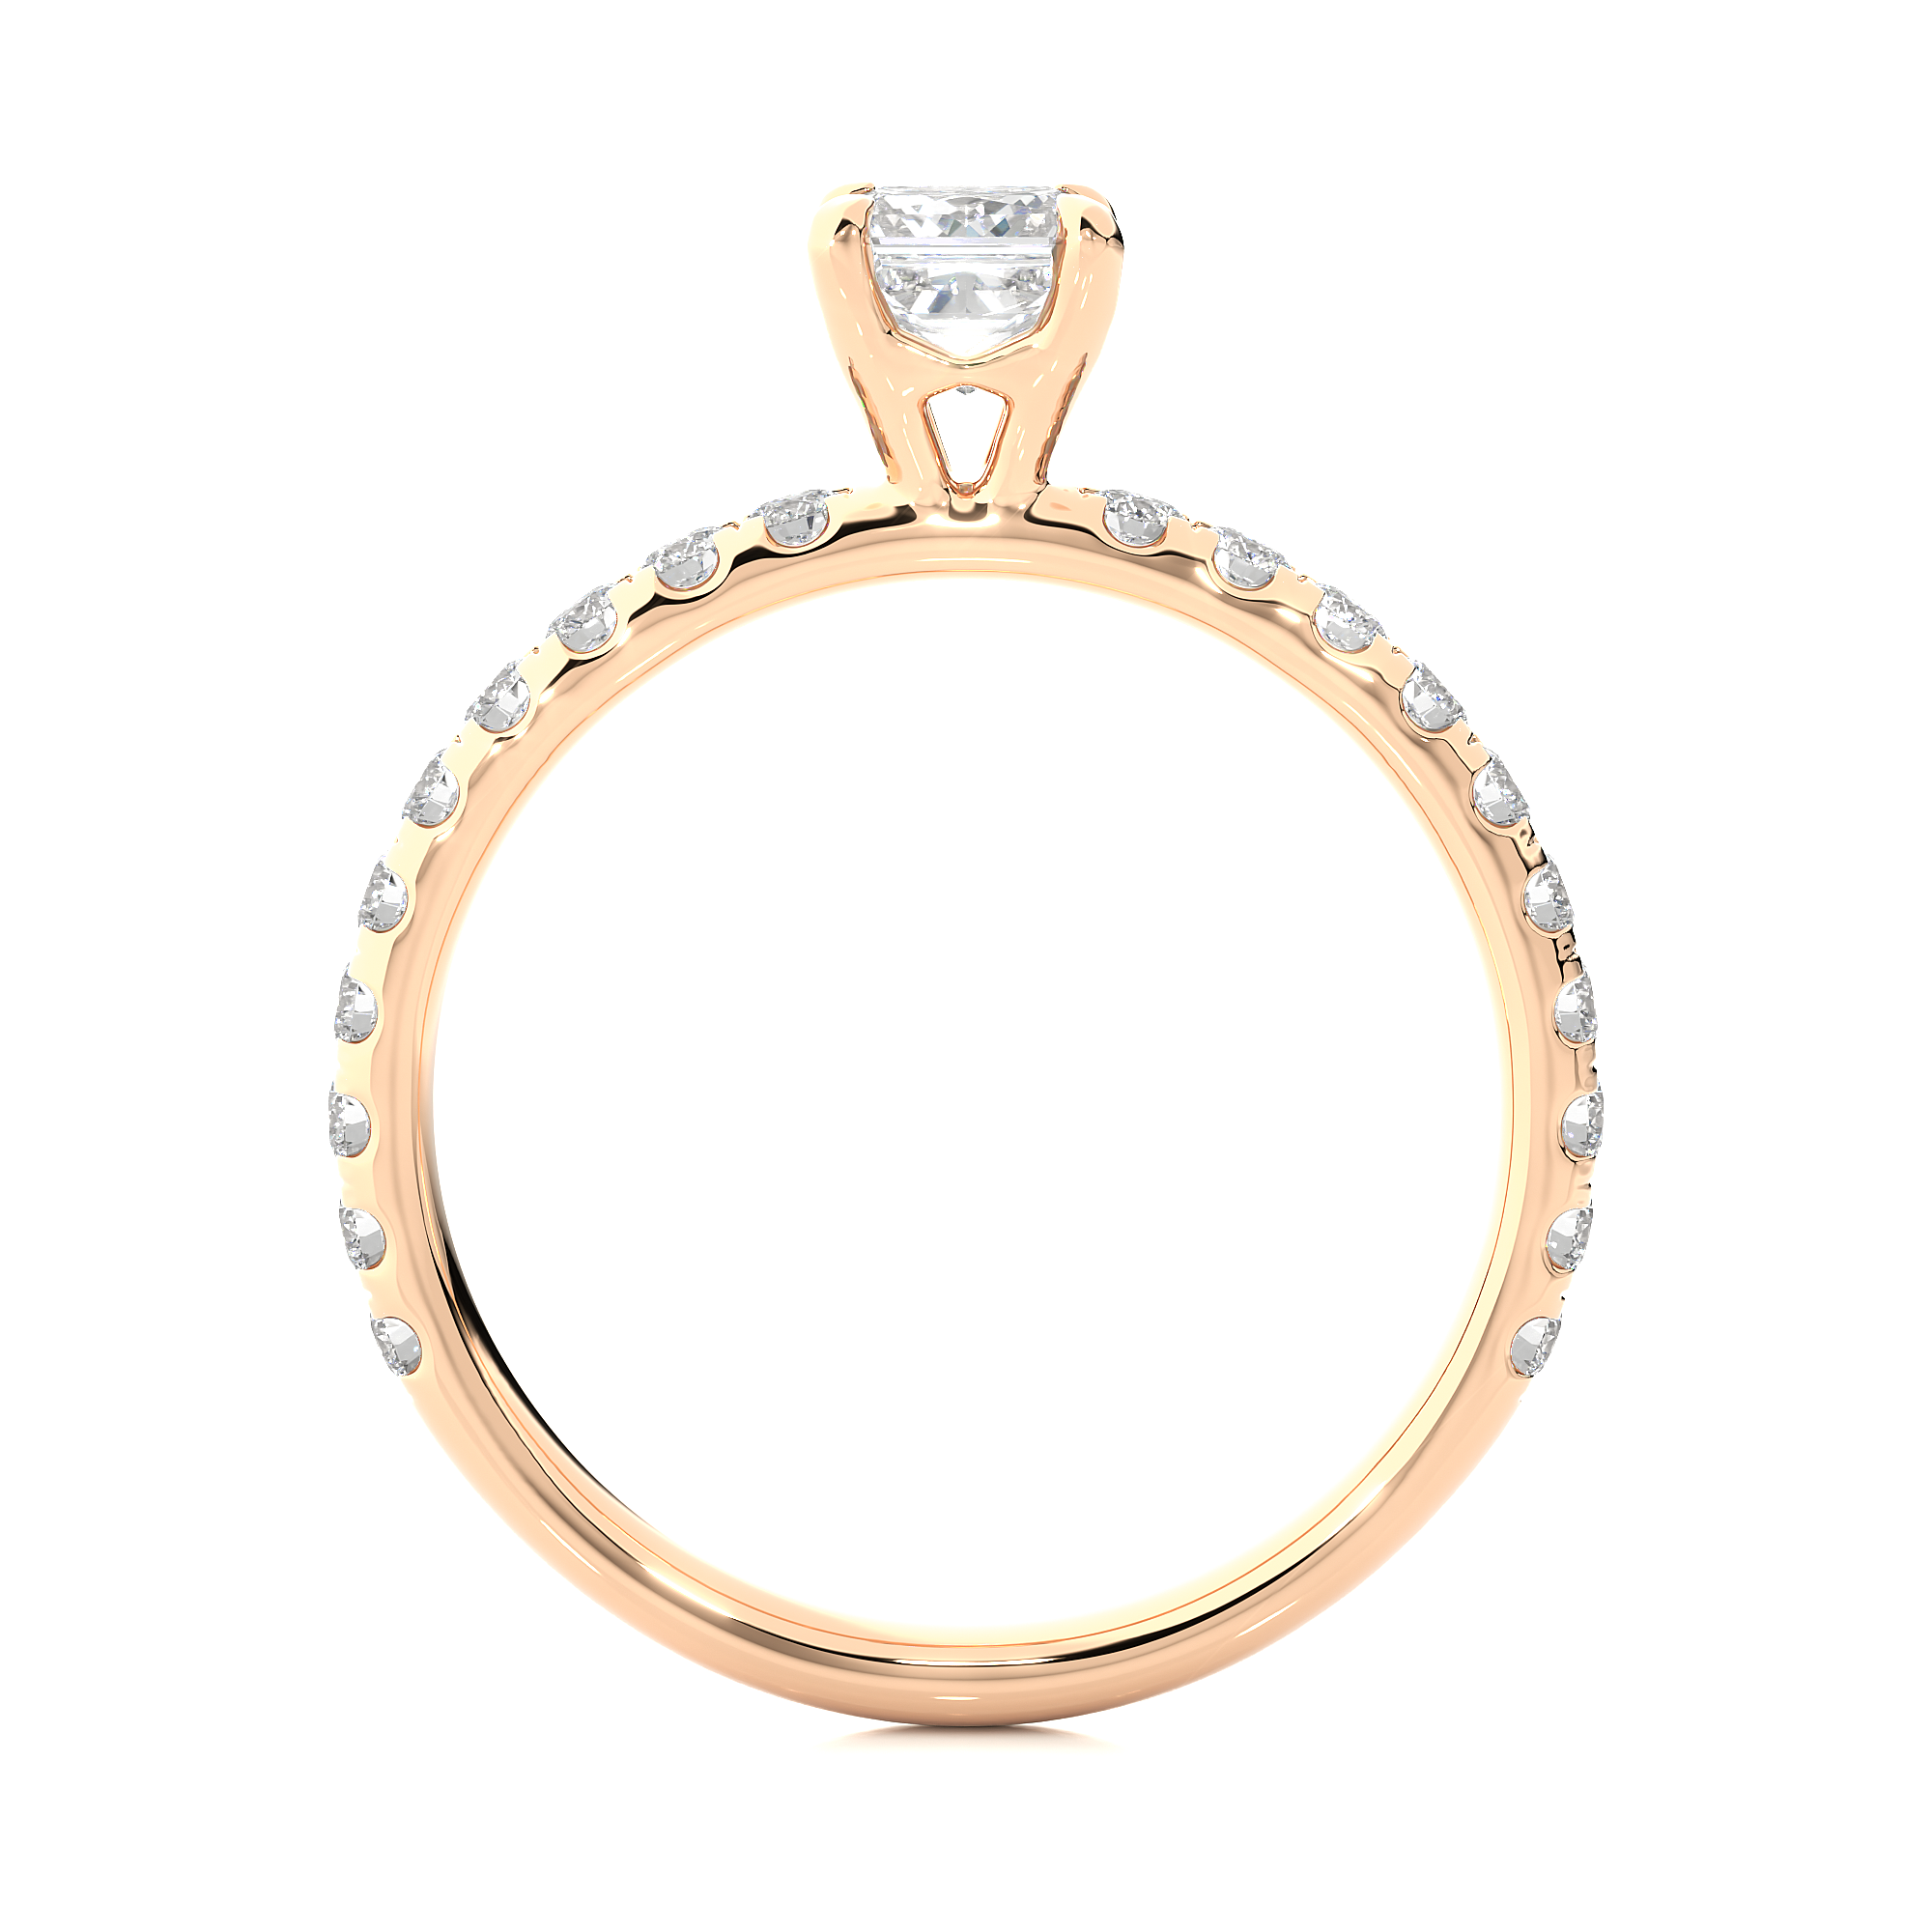 1.01Ct Solitaire Ring With Round Cut Diamond in 14Kt Rose Gold - Blu Diamonds